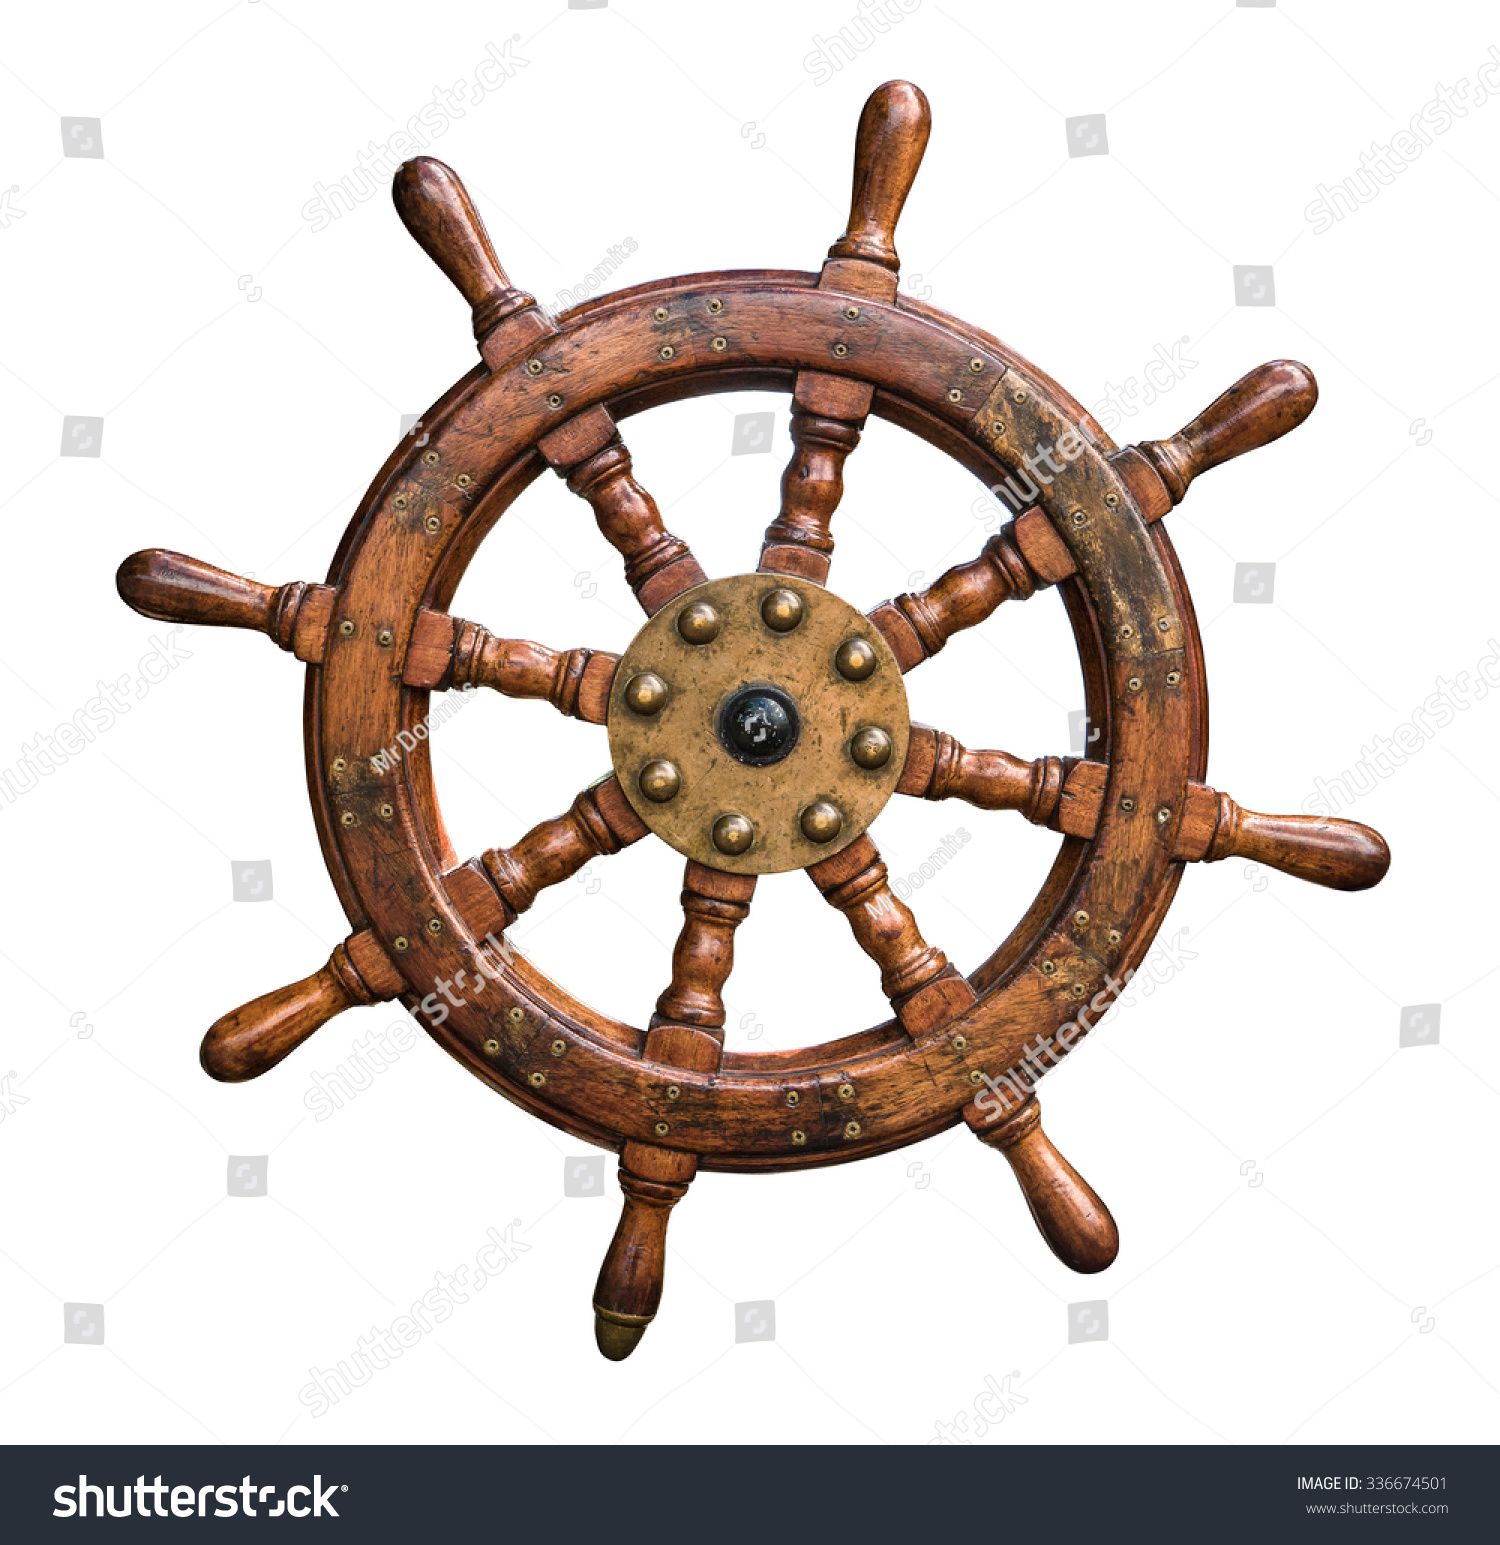 Isolated Vintage Wooden And Brass Ship's Steering Wheel With White Background #336674501